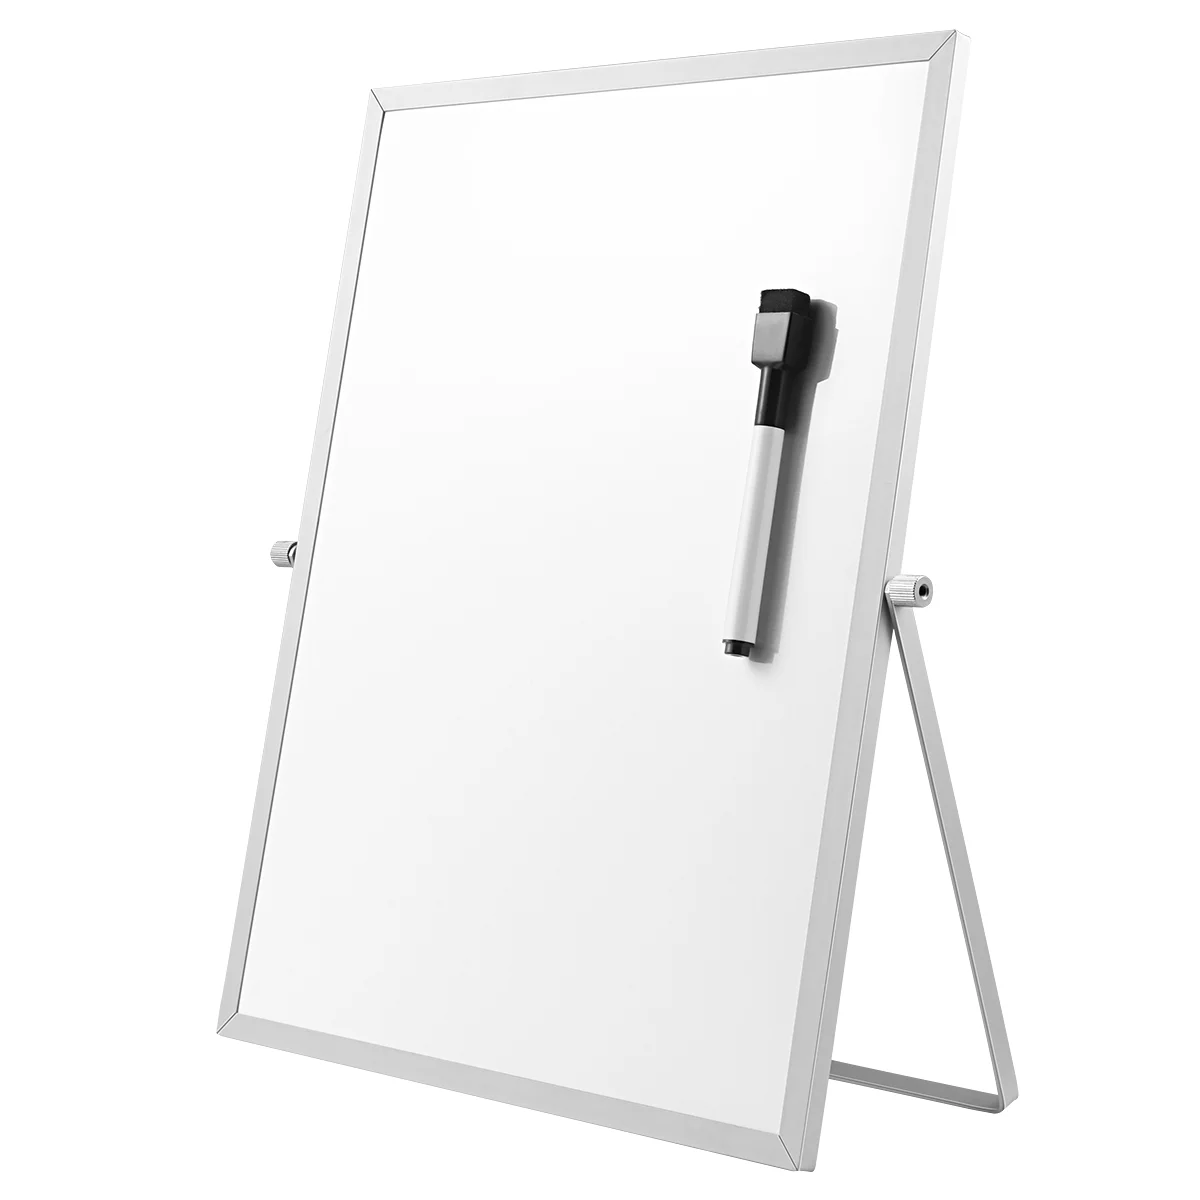 Magnetic White Board Double Sided Desktop Dry Erase Board with Dry Erase Pen Dry Eraser Planner Reminder for School Erasable